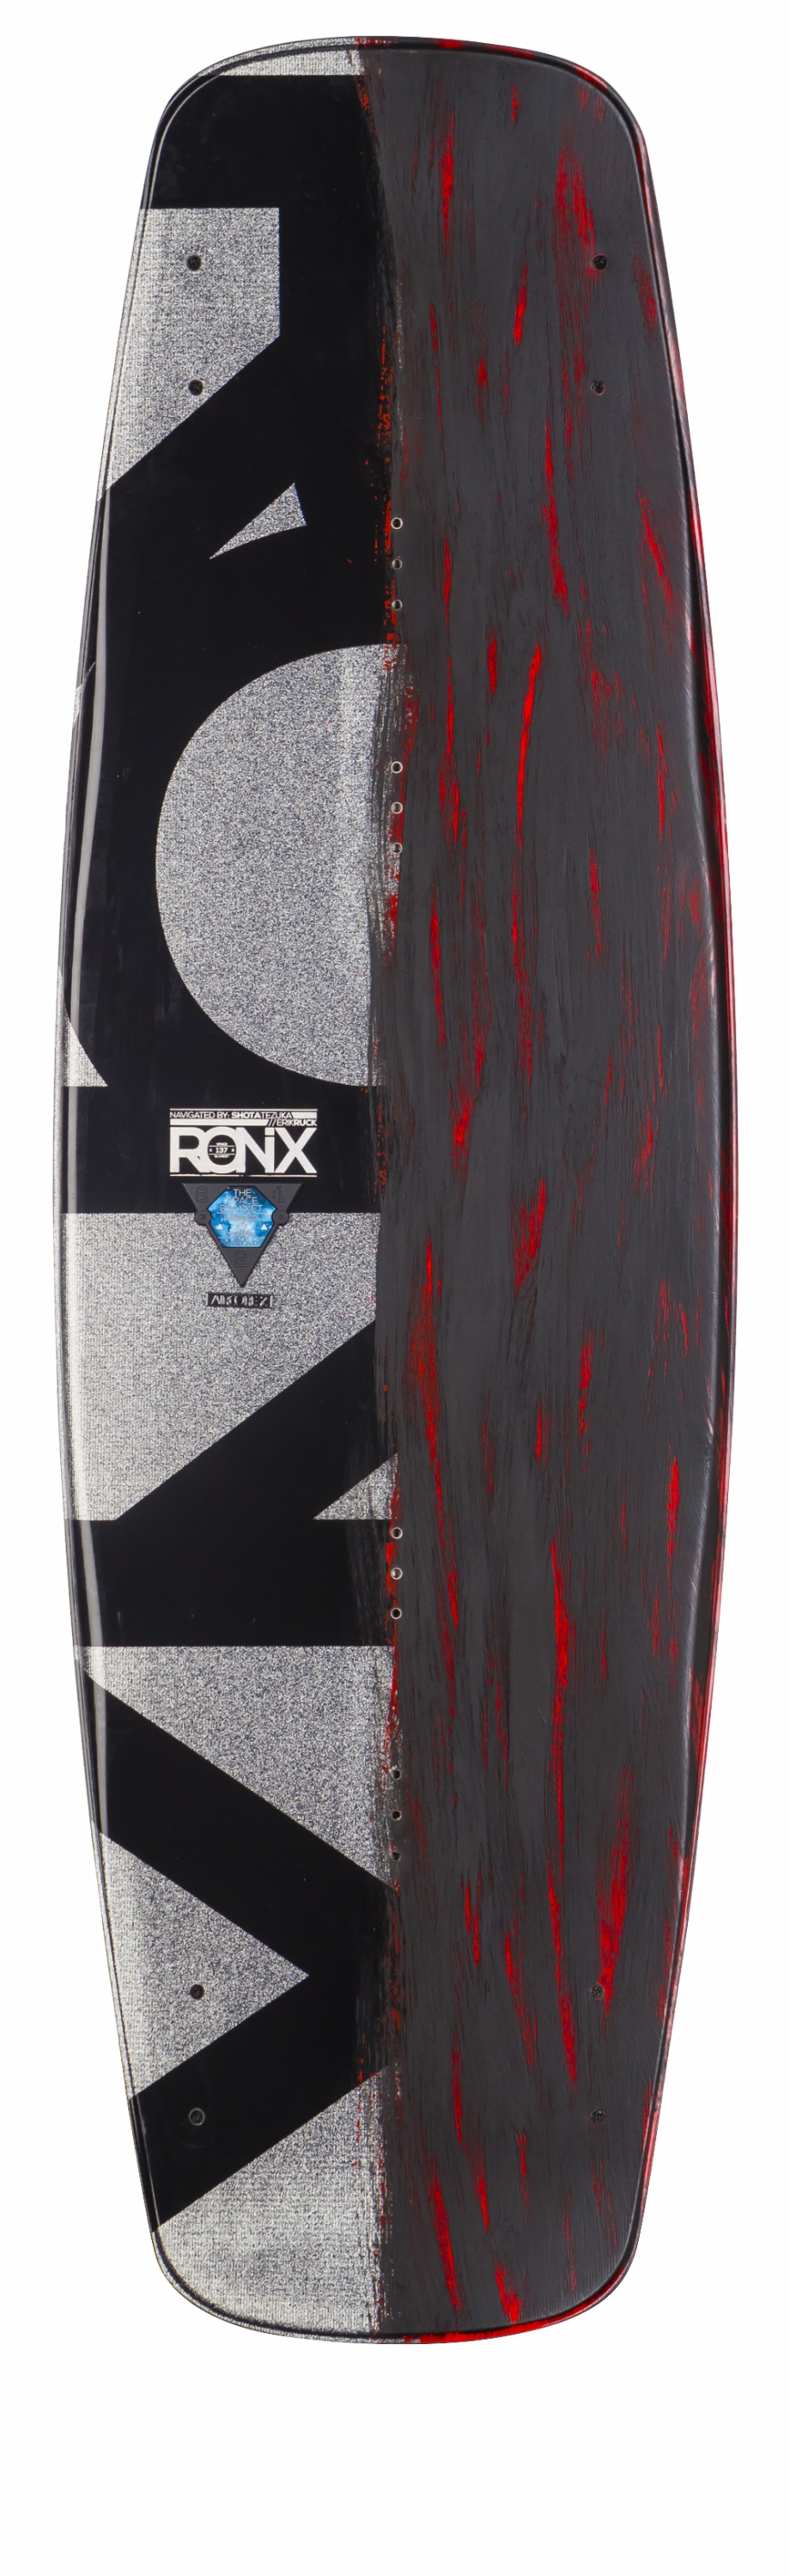 2016 Ronix Space Blanket Air Core Wakeboard Ronix